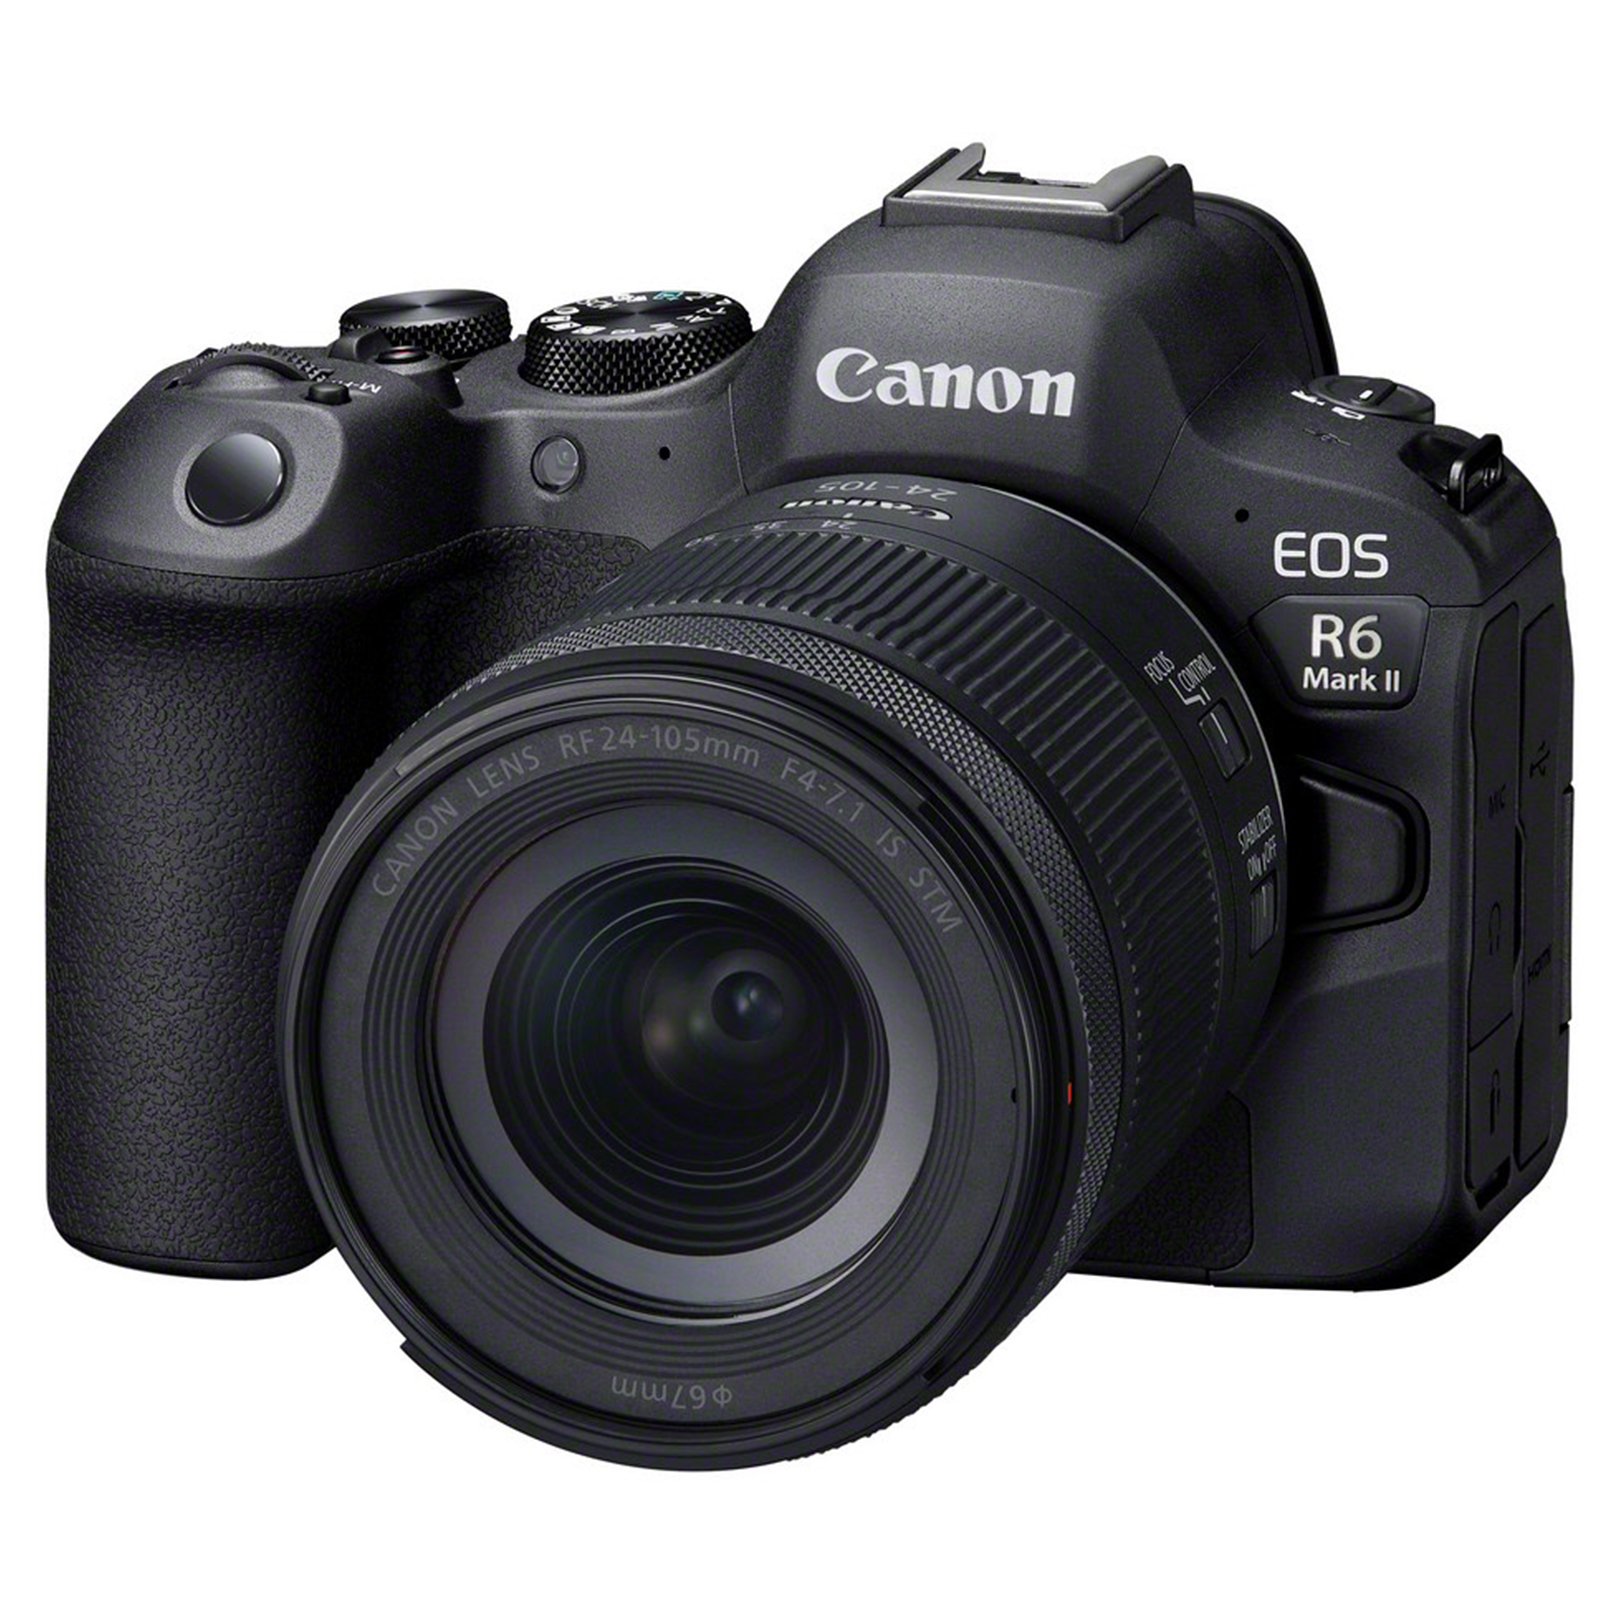 Image of Canon EOS R6 Mark II Digital Camera with 24105mm STM Lens